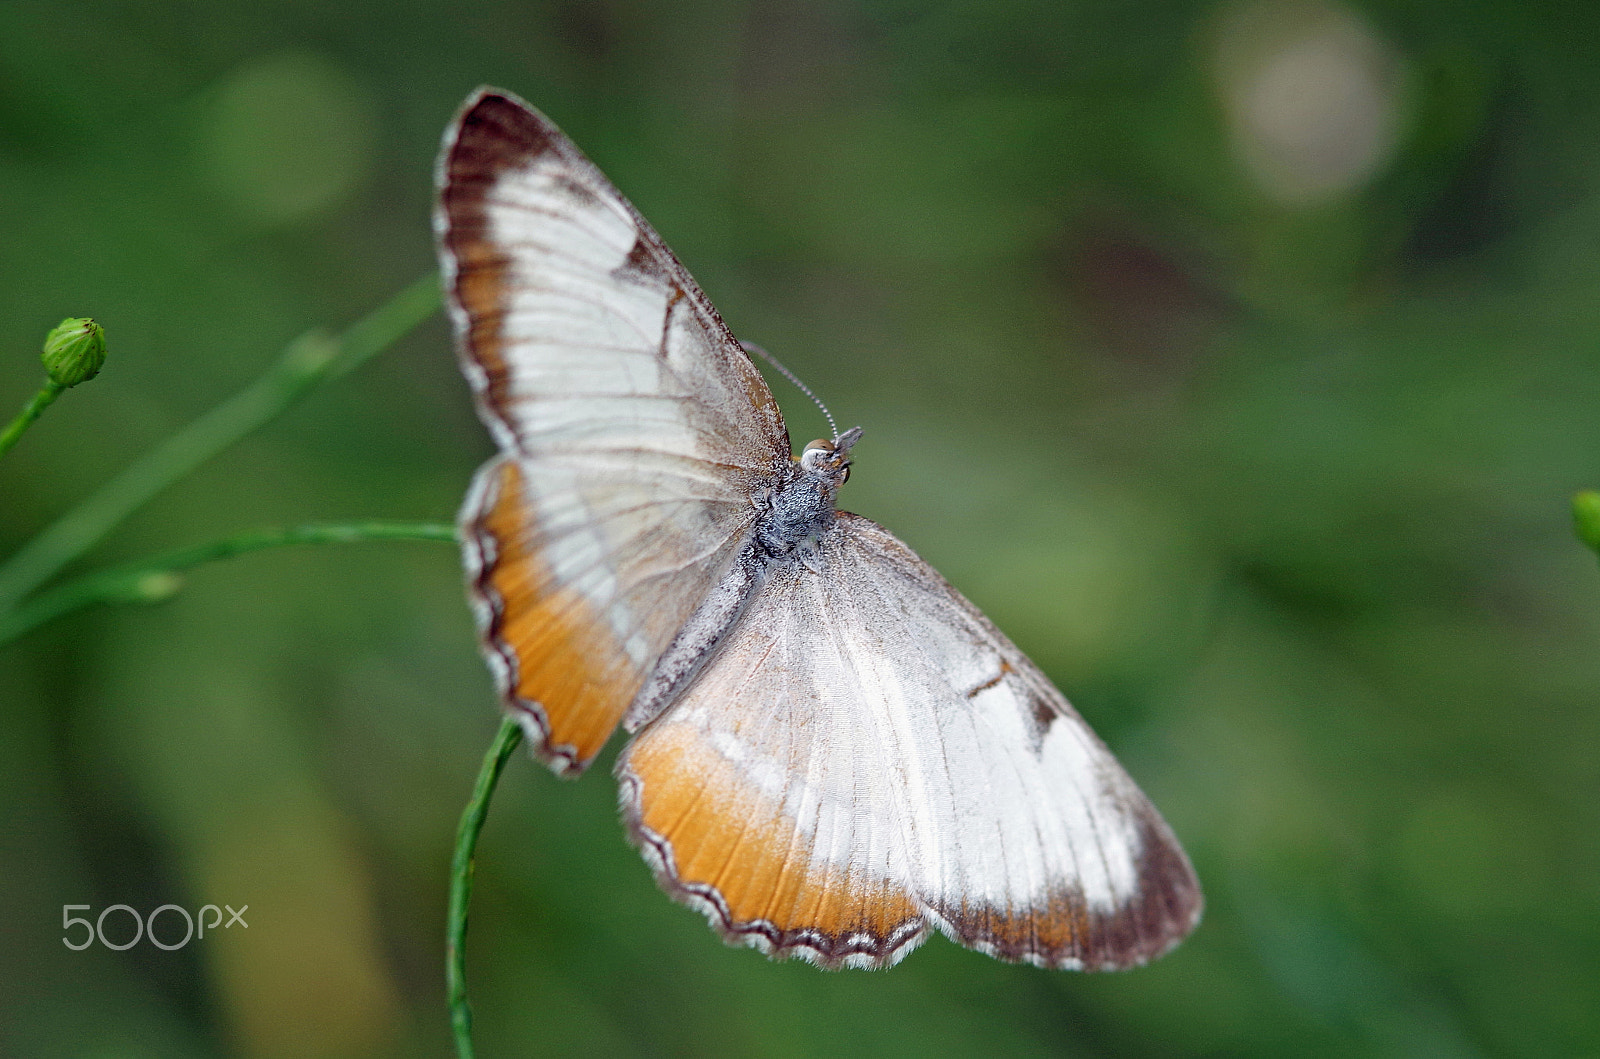 Pentax K-30 sample photo. Butterfly two photography